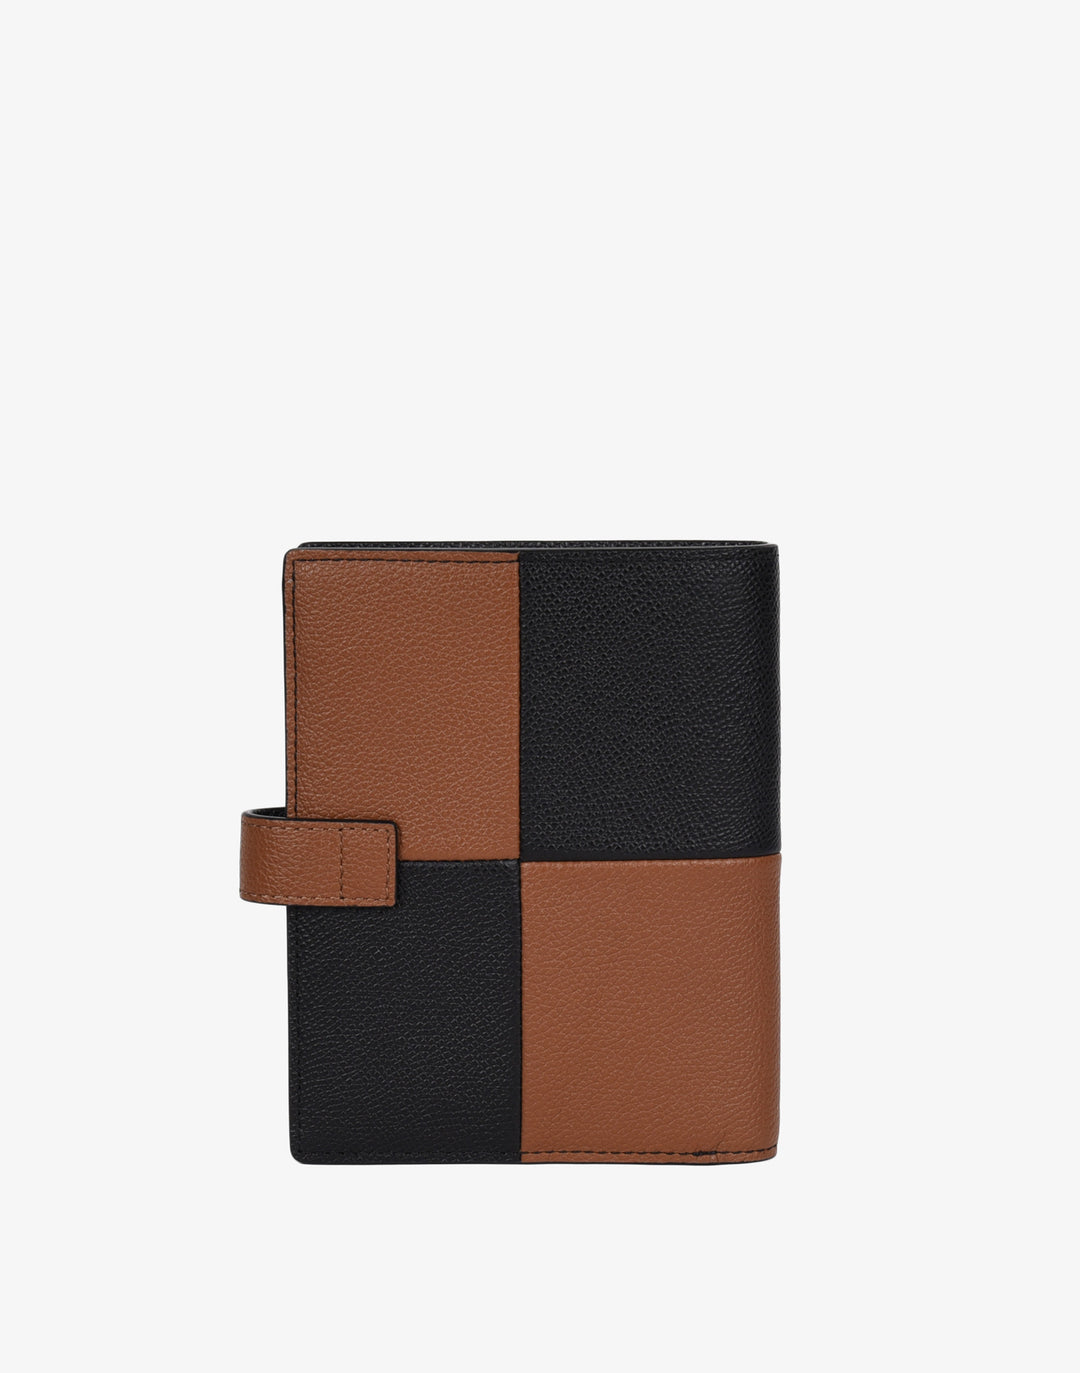 hyer goods recycled leather travel passport wallet black cognac check#color_cognac-check